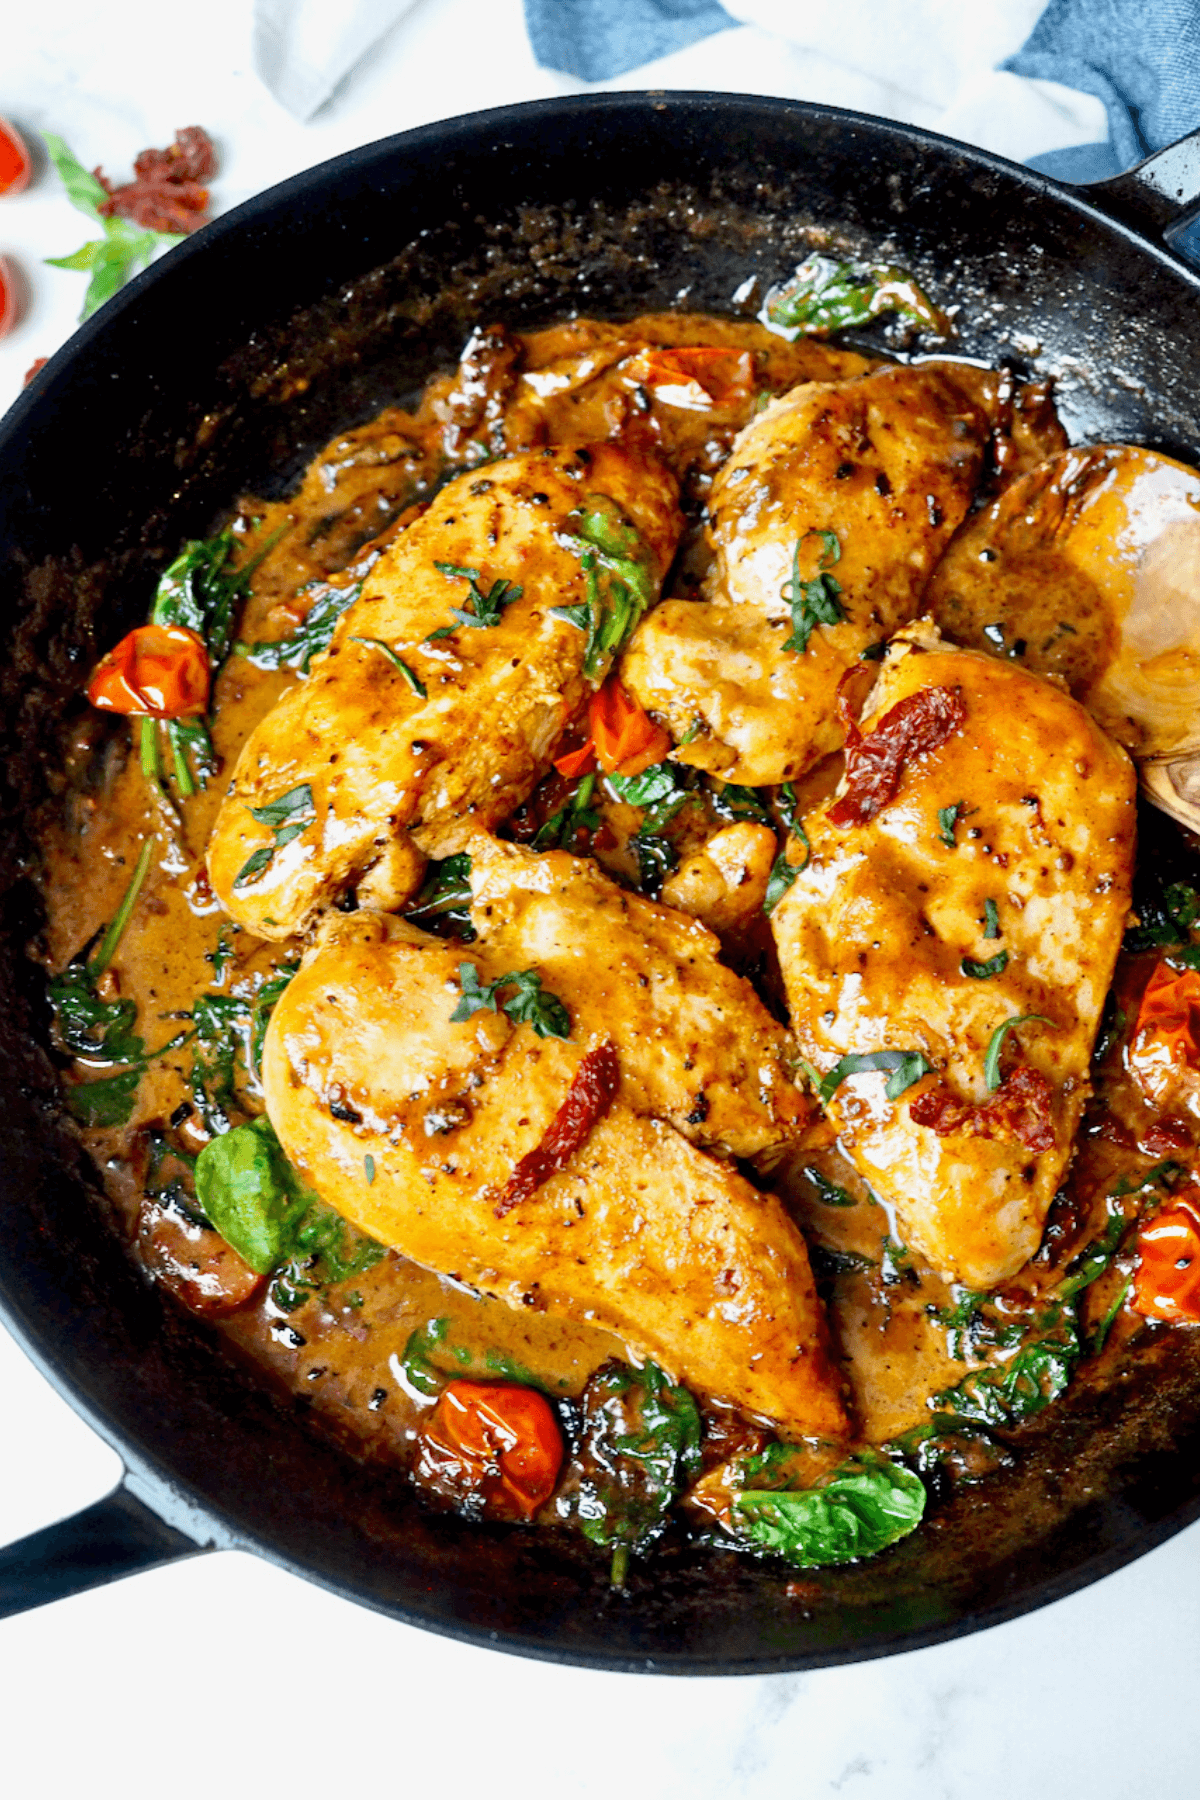 Creamy Tuscan chicken in one pan with sun dried tomatoes, fresh tomatoes and spinach in a parmesan cream sauce.